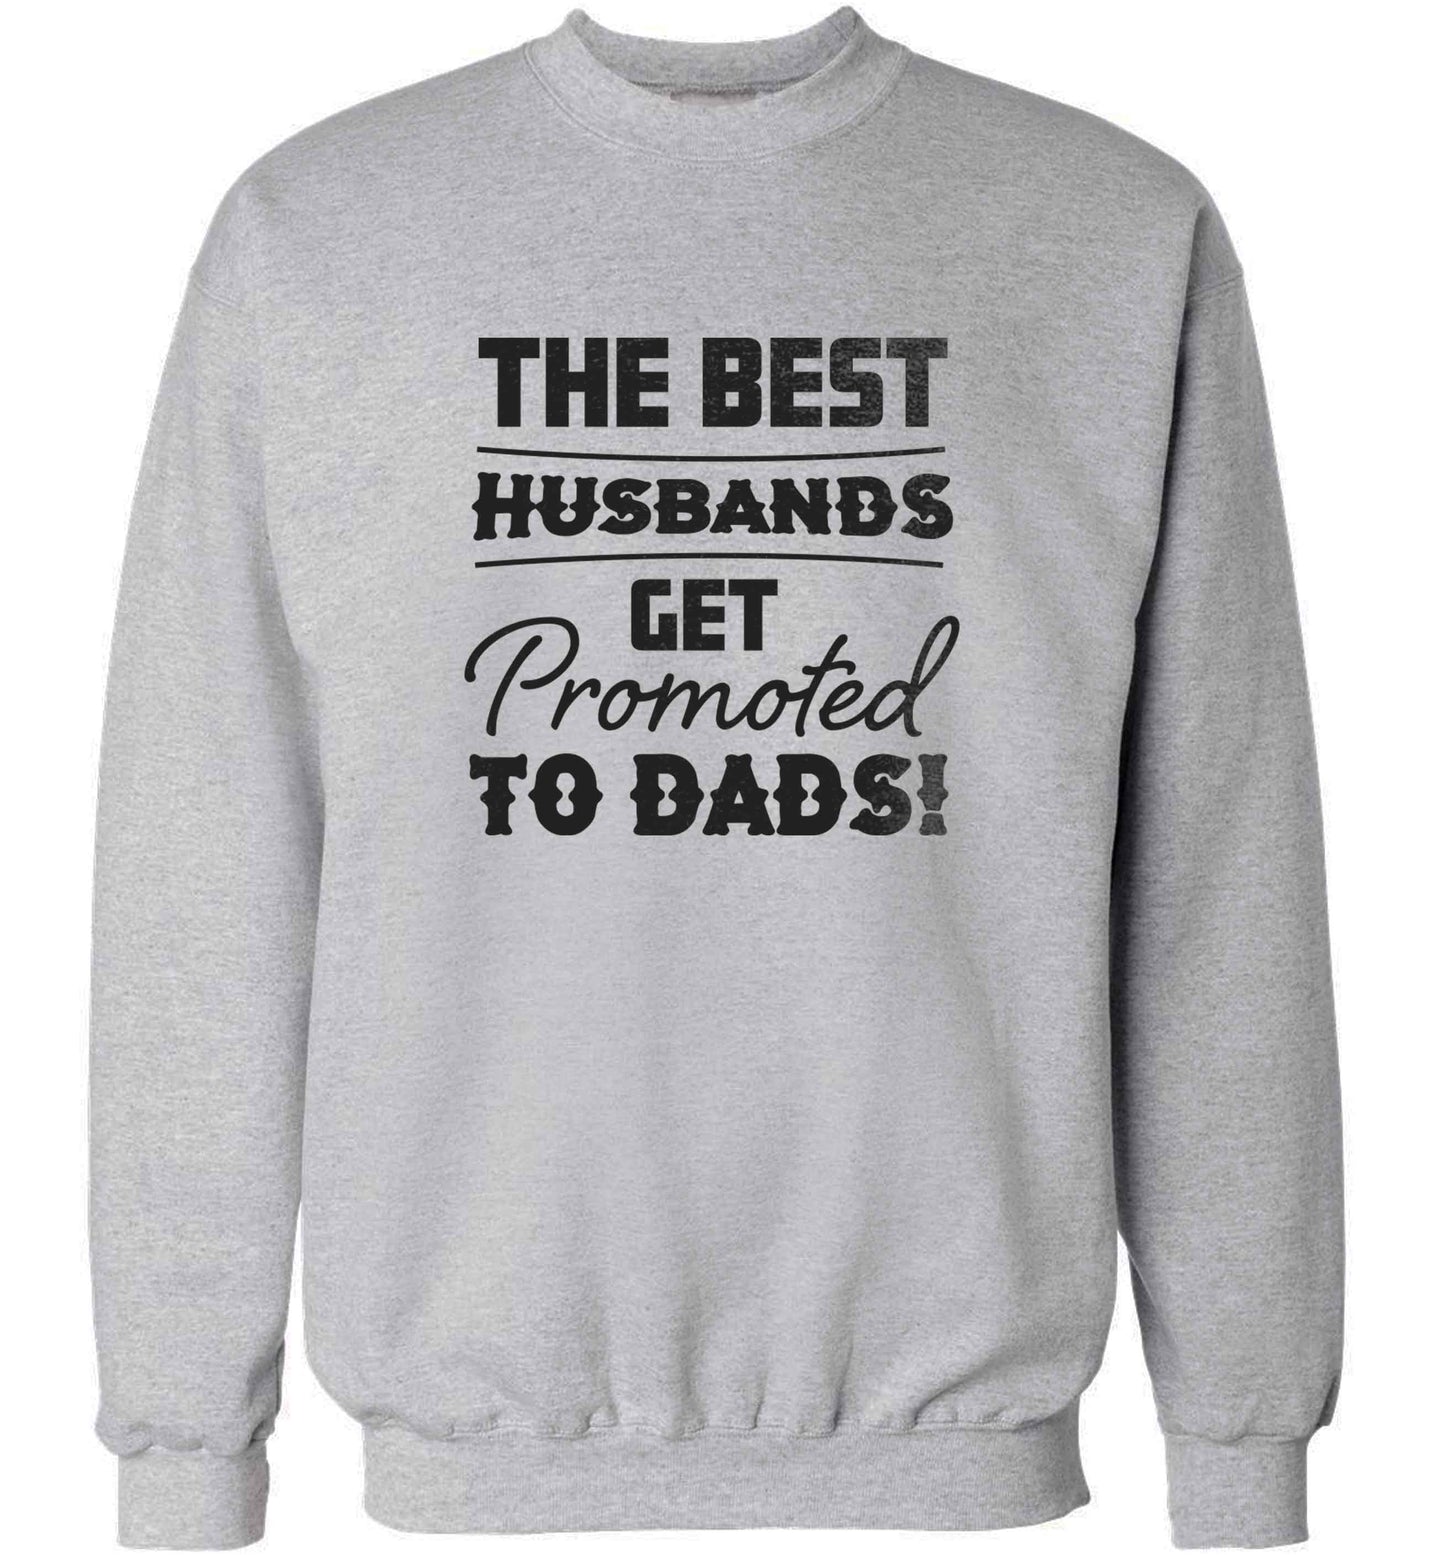 The best husbands get promoted to Dads adult's unisex grey sweater 2XL